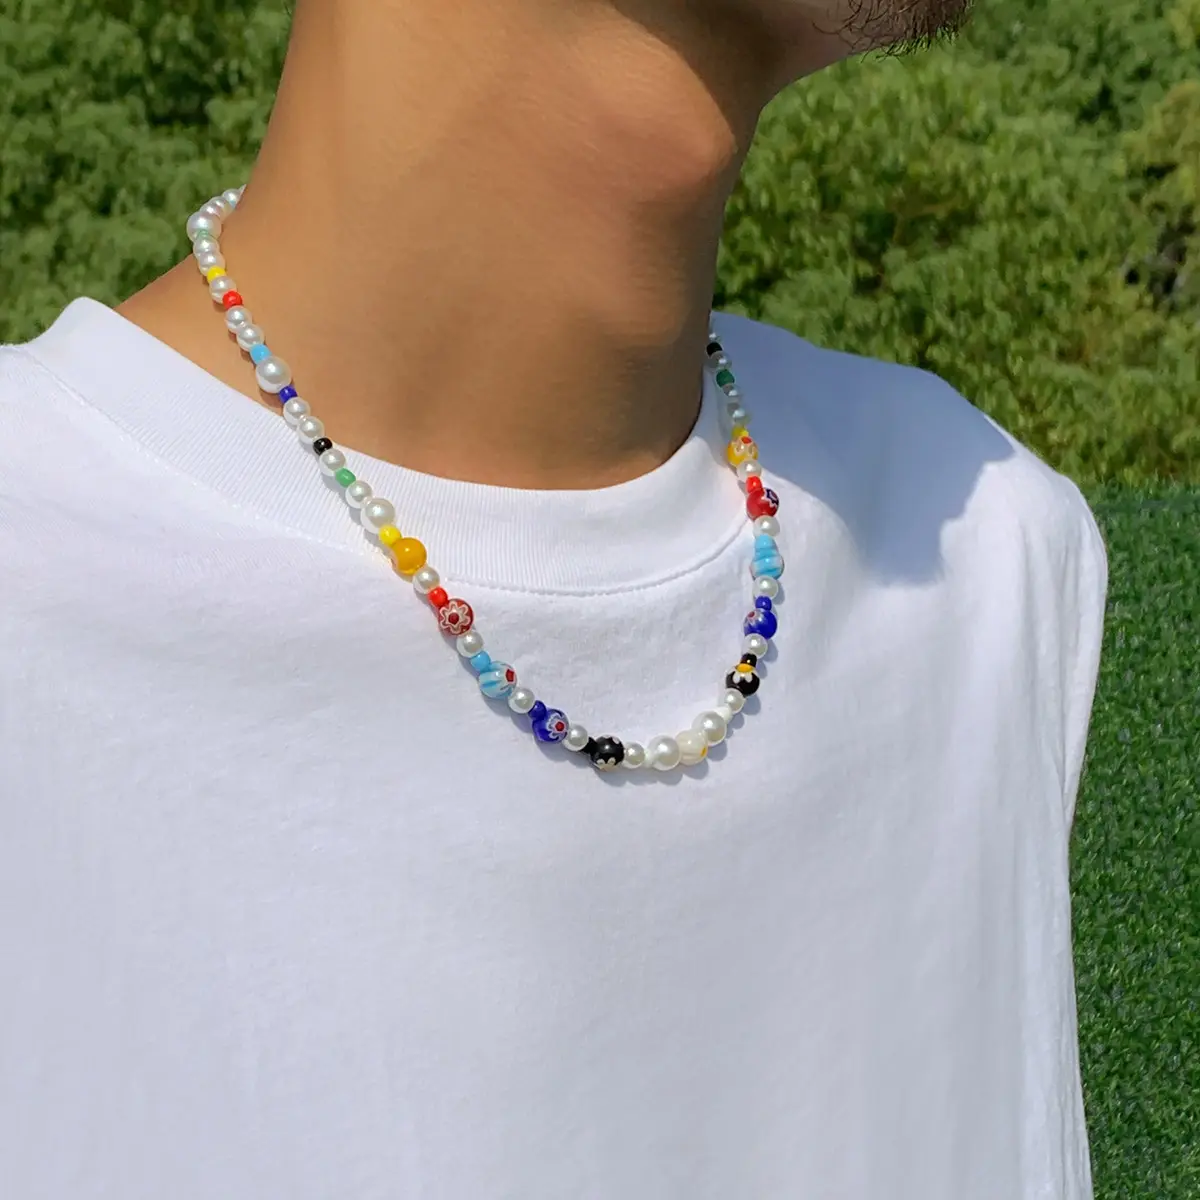 Vintage Trendy Charm Necklace Jewelry for Men Women Unisex Exquisite Handmade Pearl Colorful Beads Beaded Choker Necklace